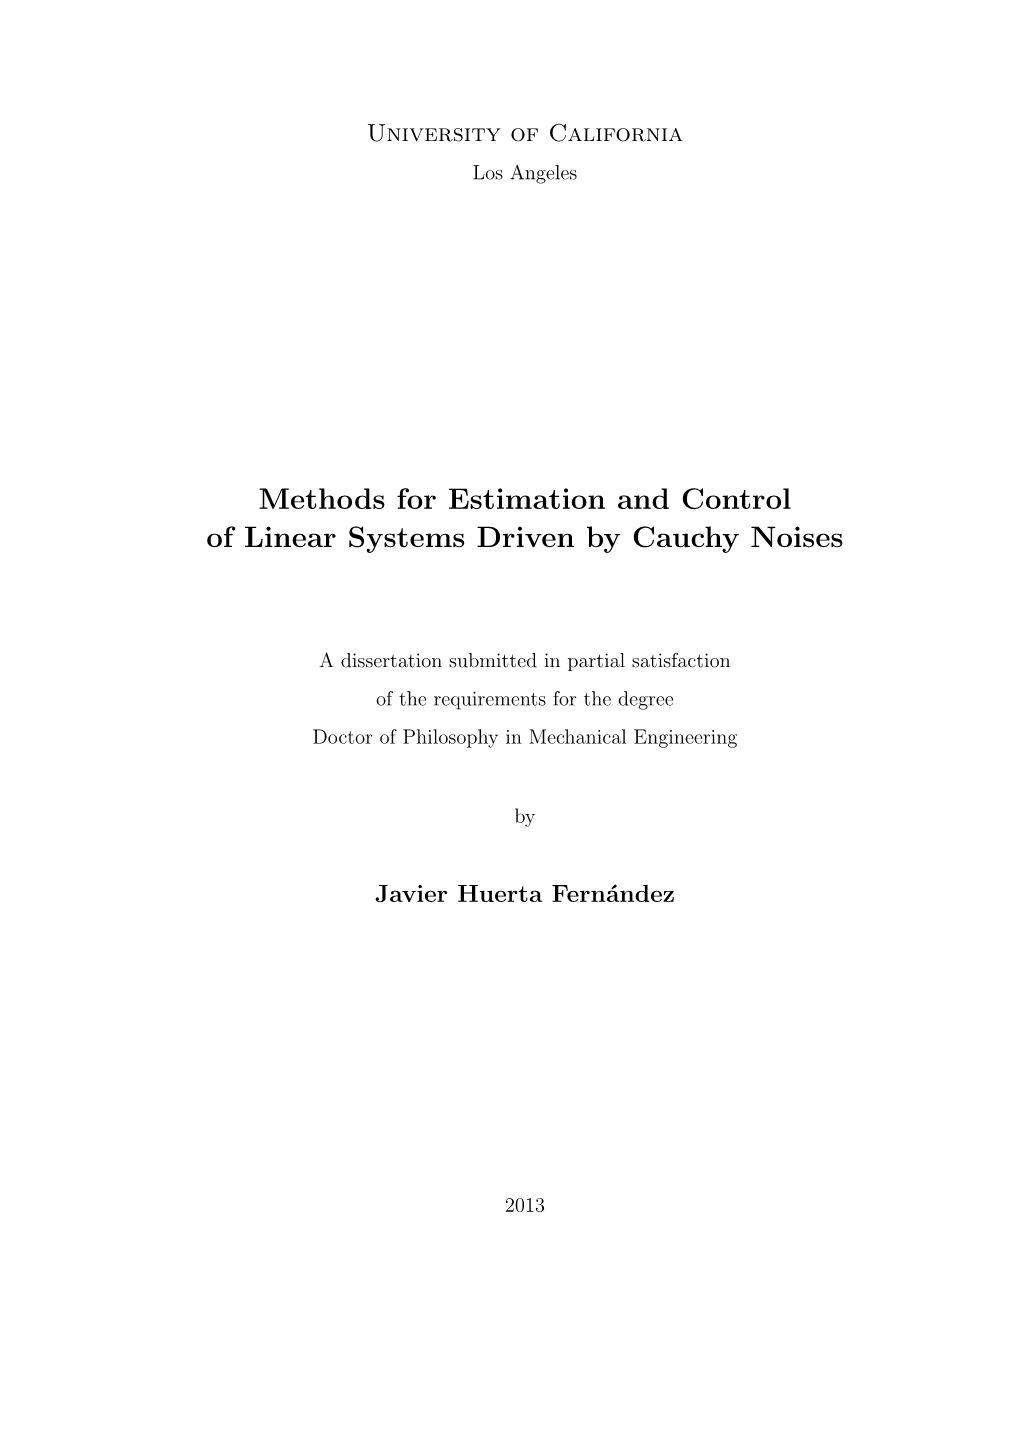 Methods for Estimation and Control of Linear Systems Driven by Cauchy Noises